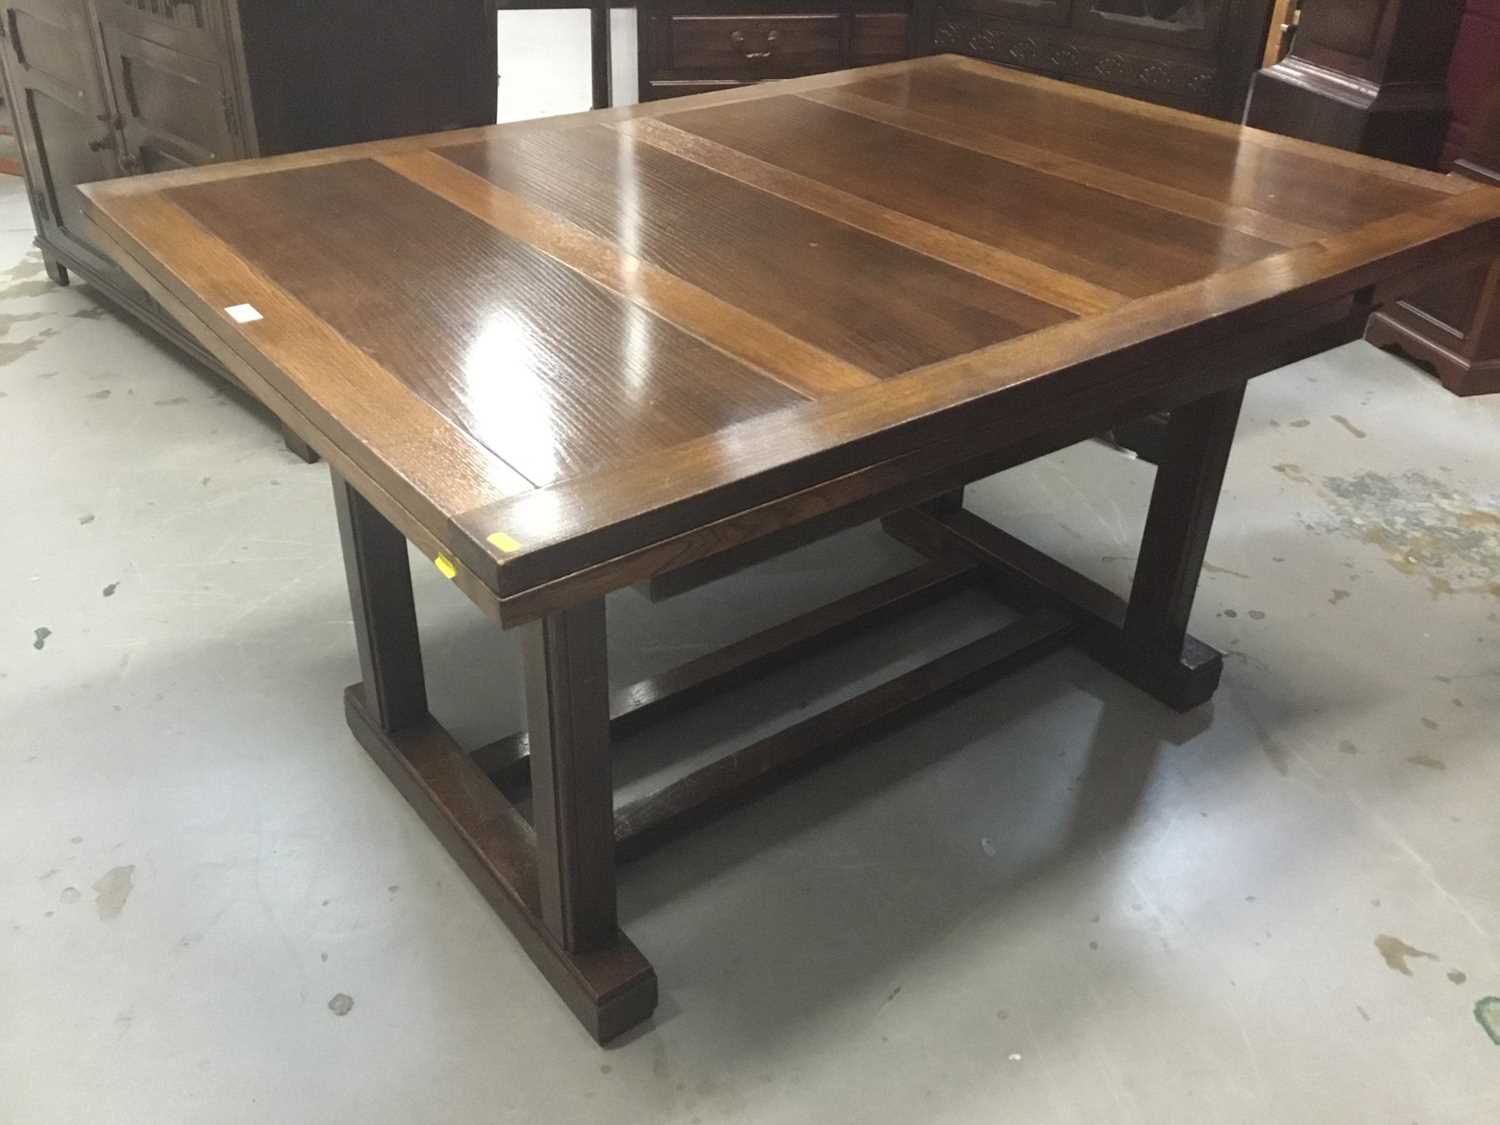 1950s oak kitchen table and chair